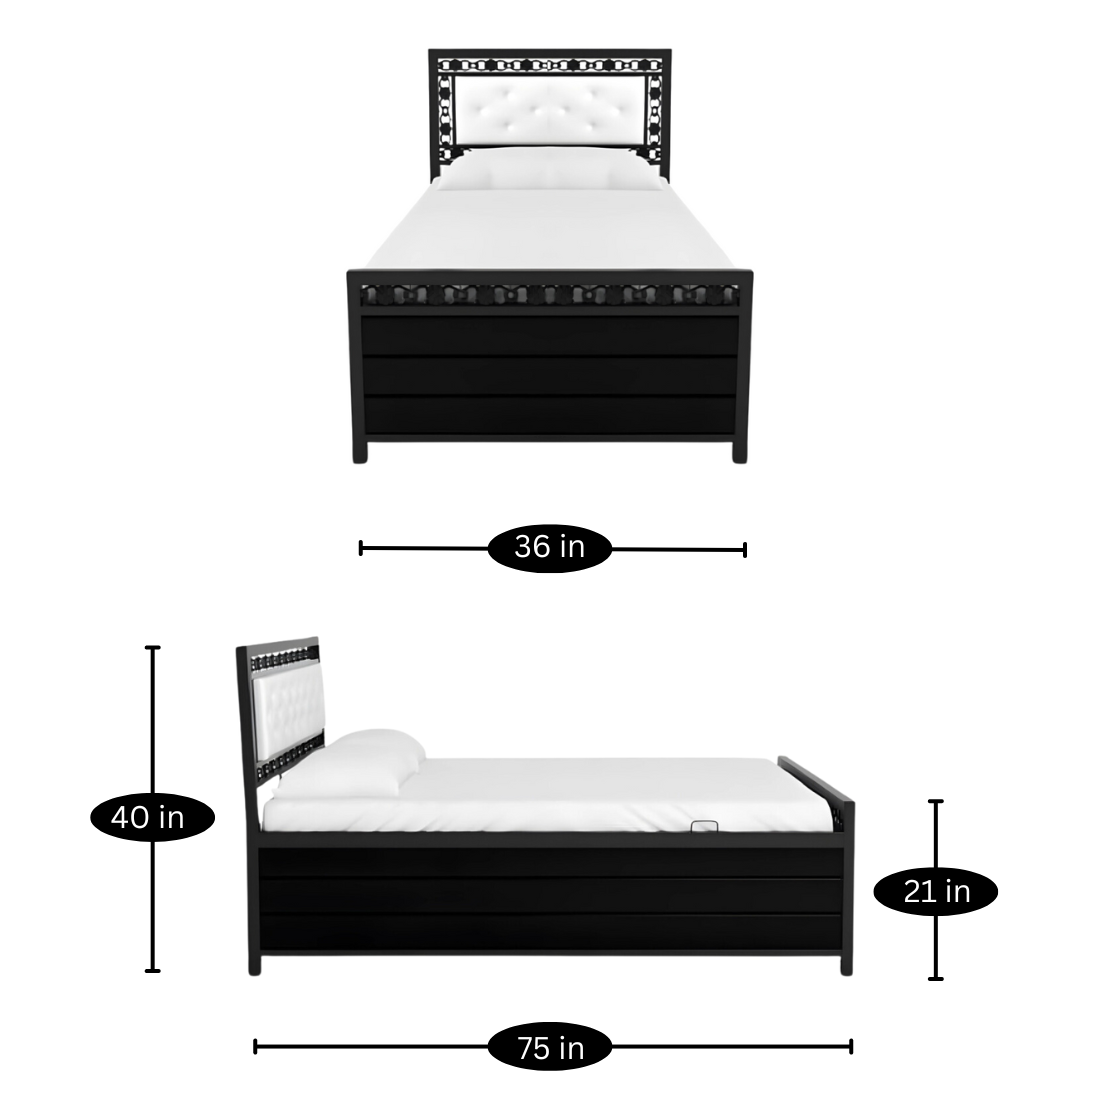 Cuba Hydraulic Storage Single Metal Bed with White Cushion Headrest (Color - Black)